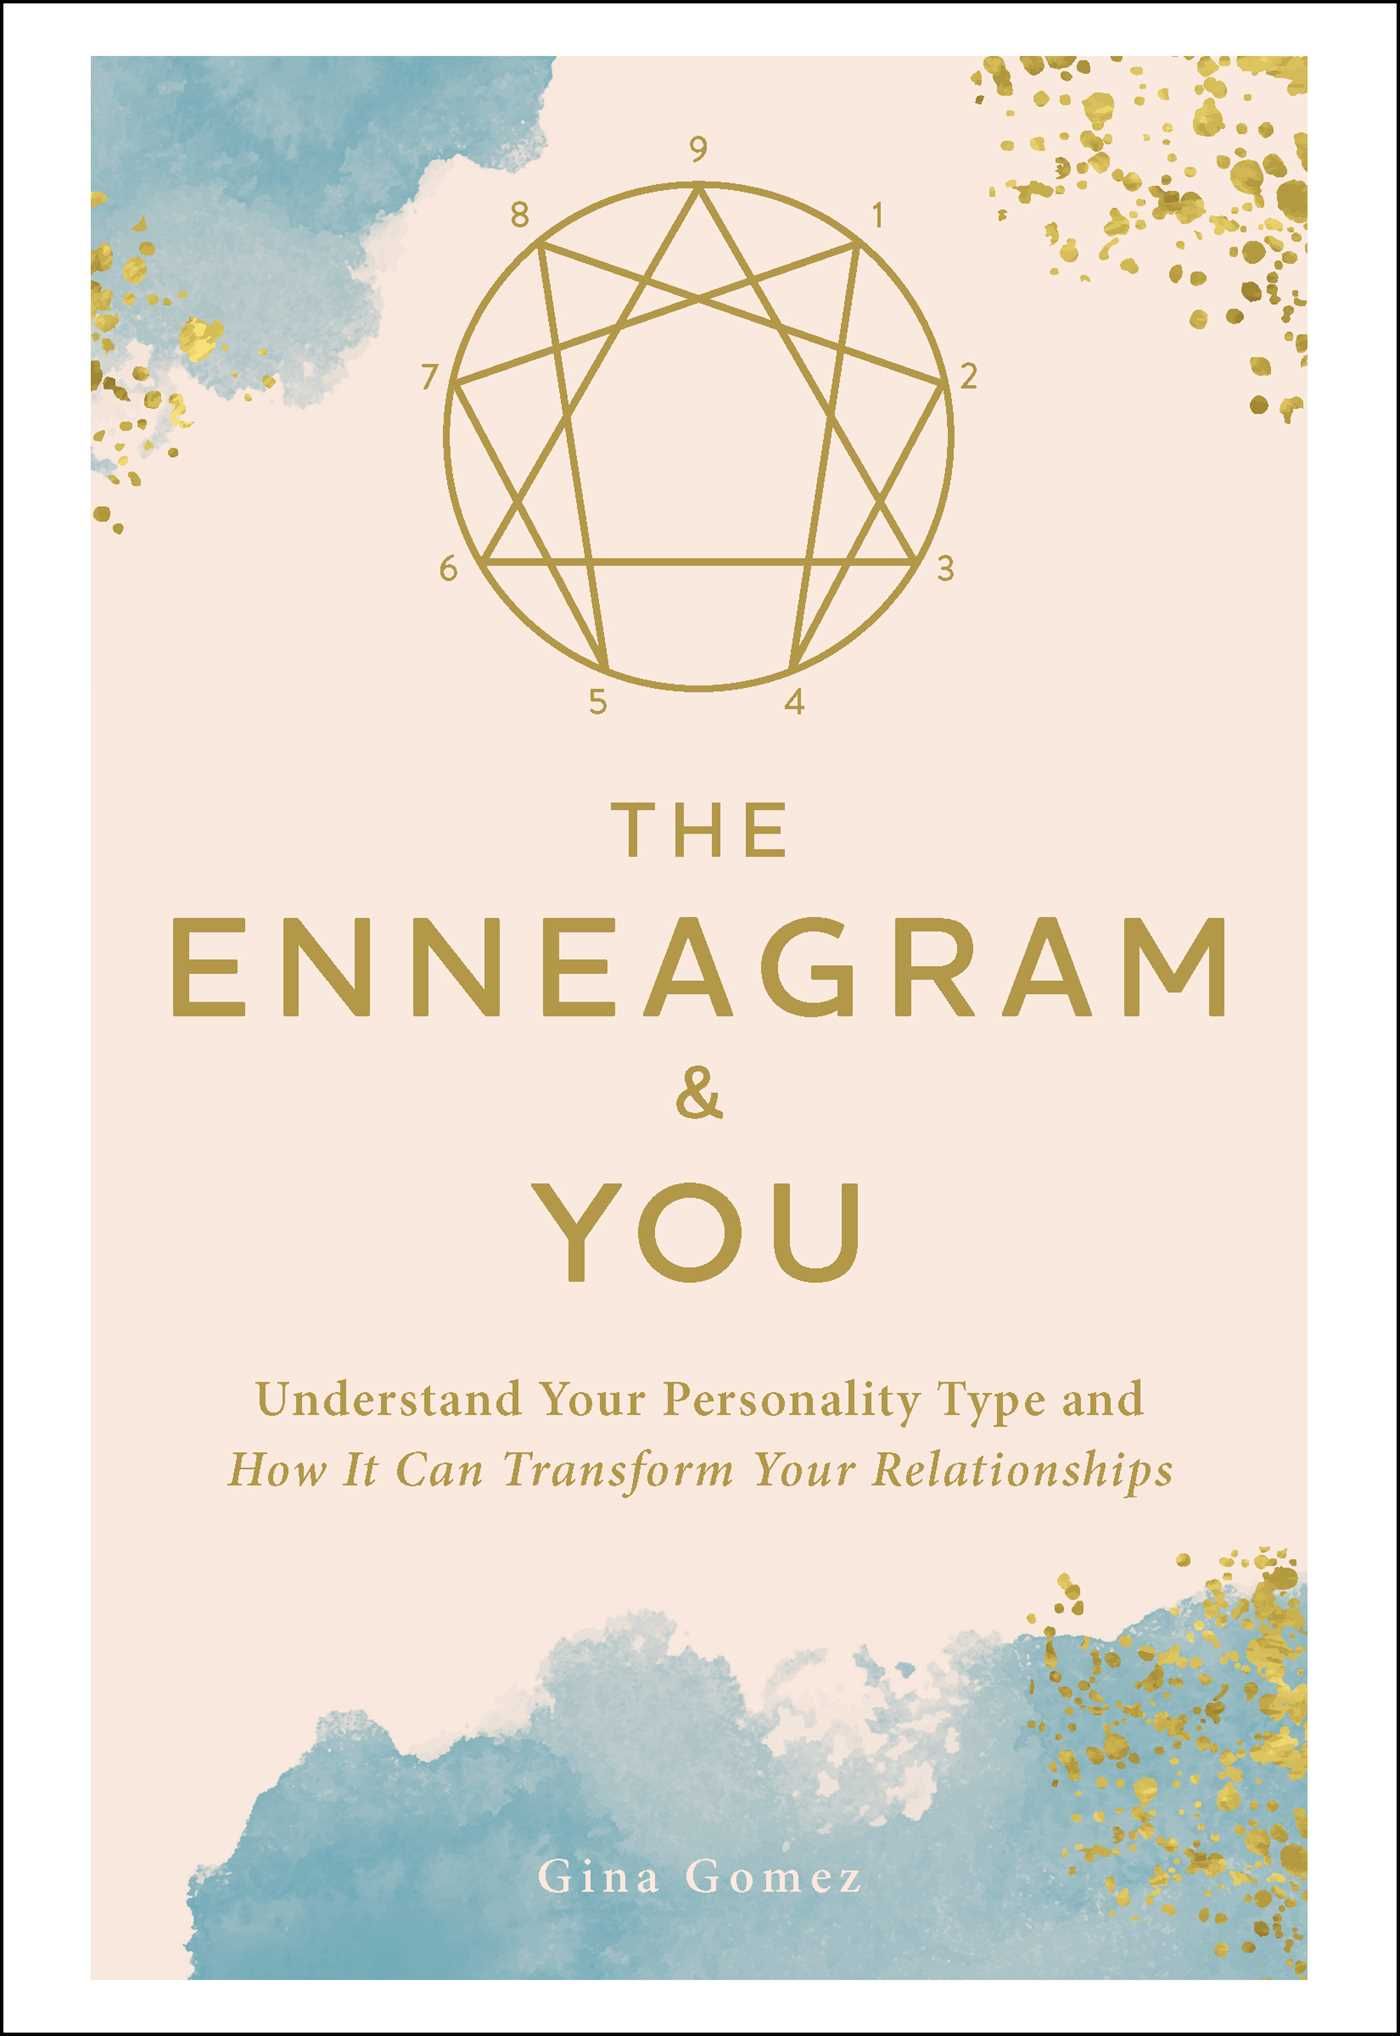 The Enneagram and You by Gina Gomez